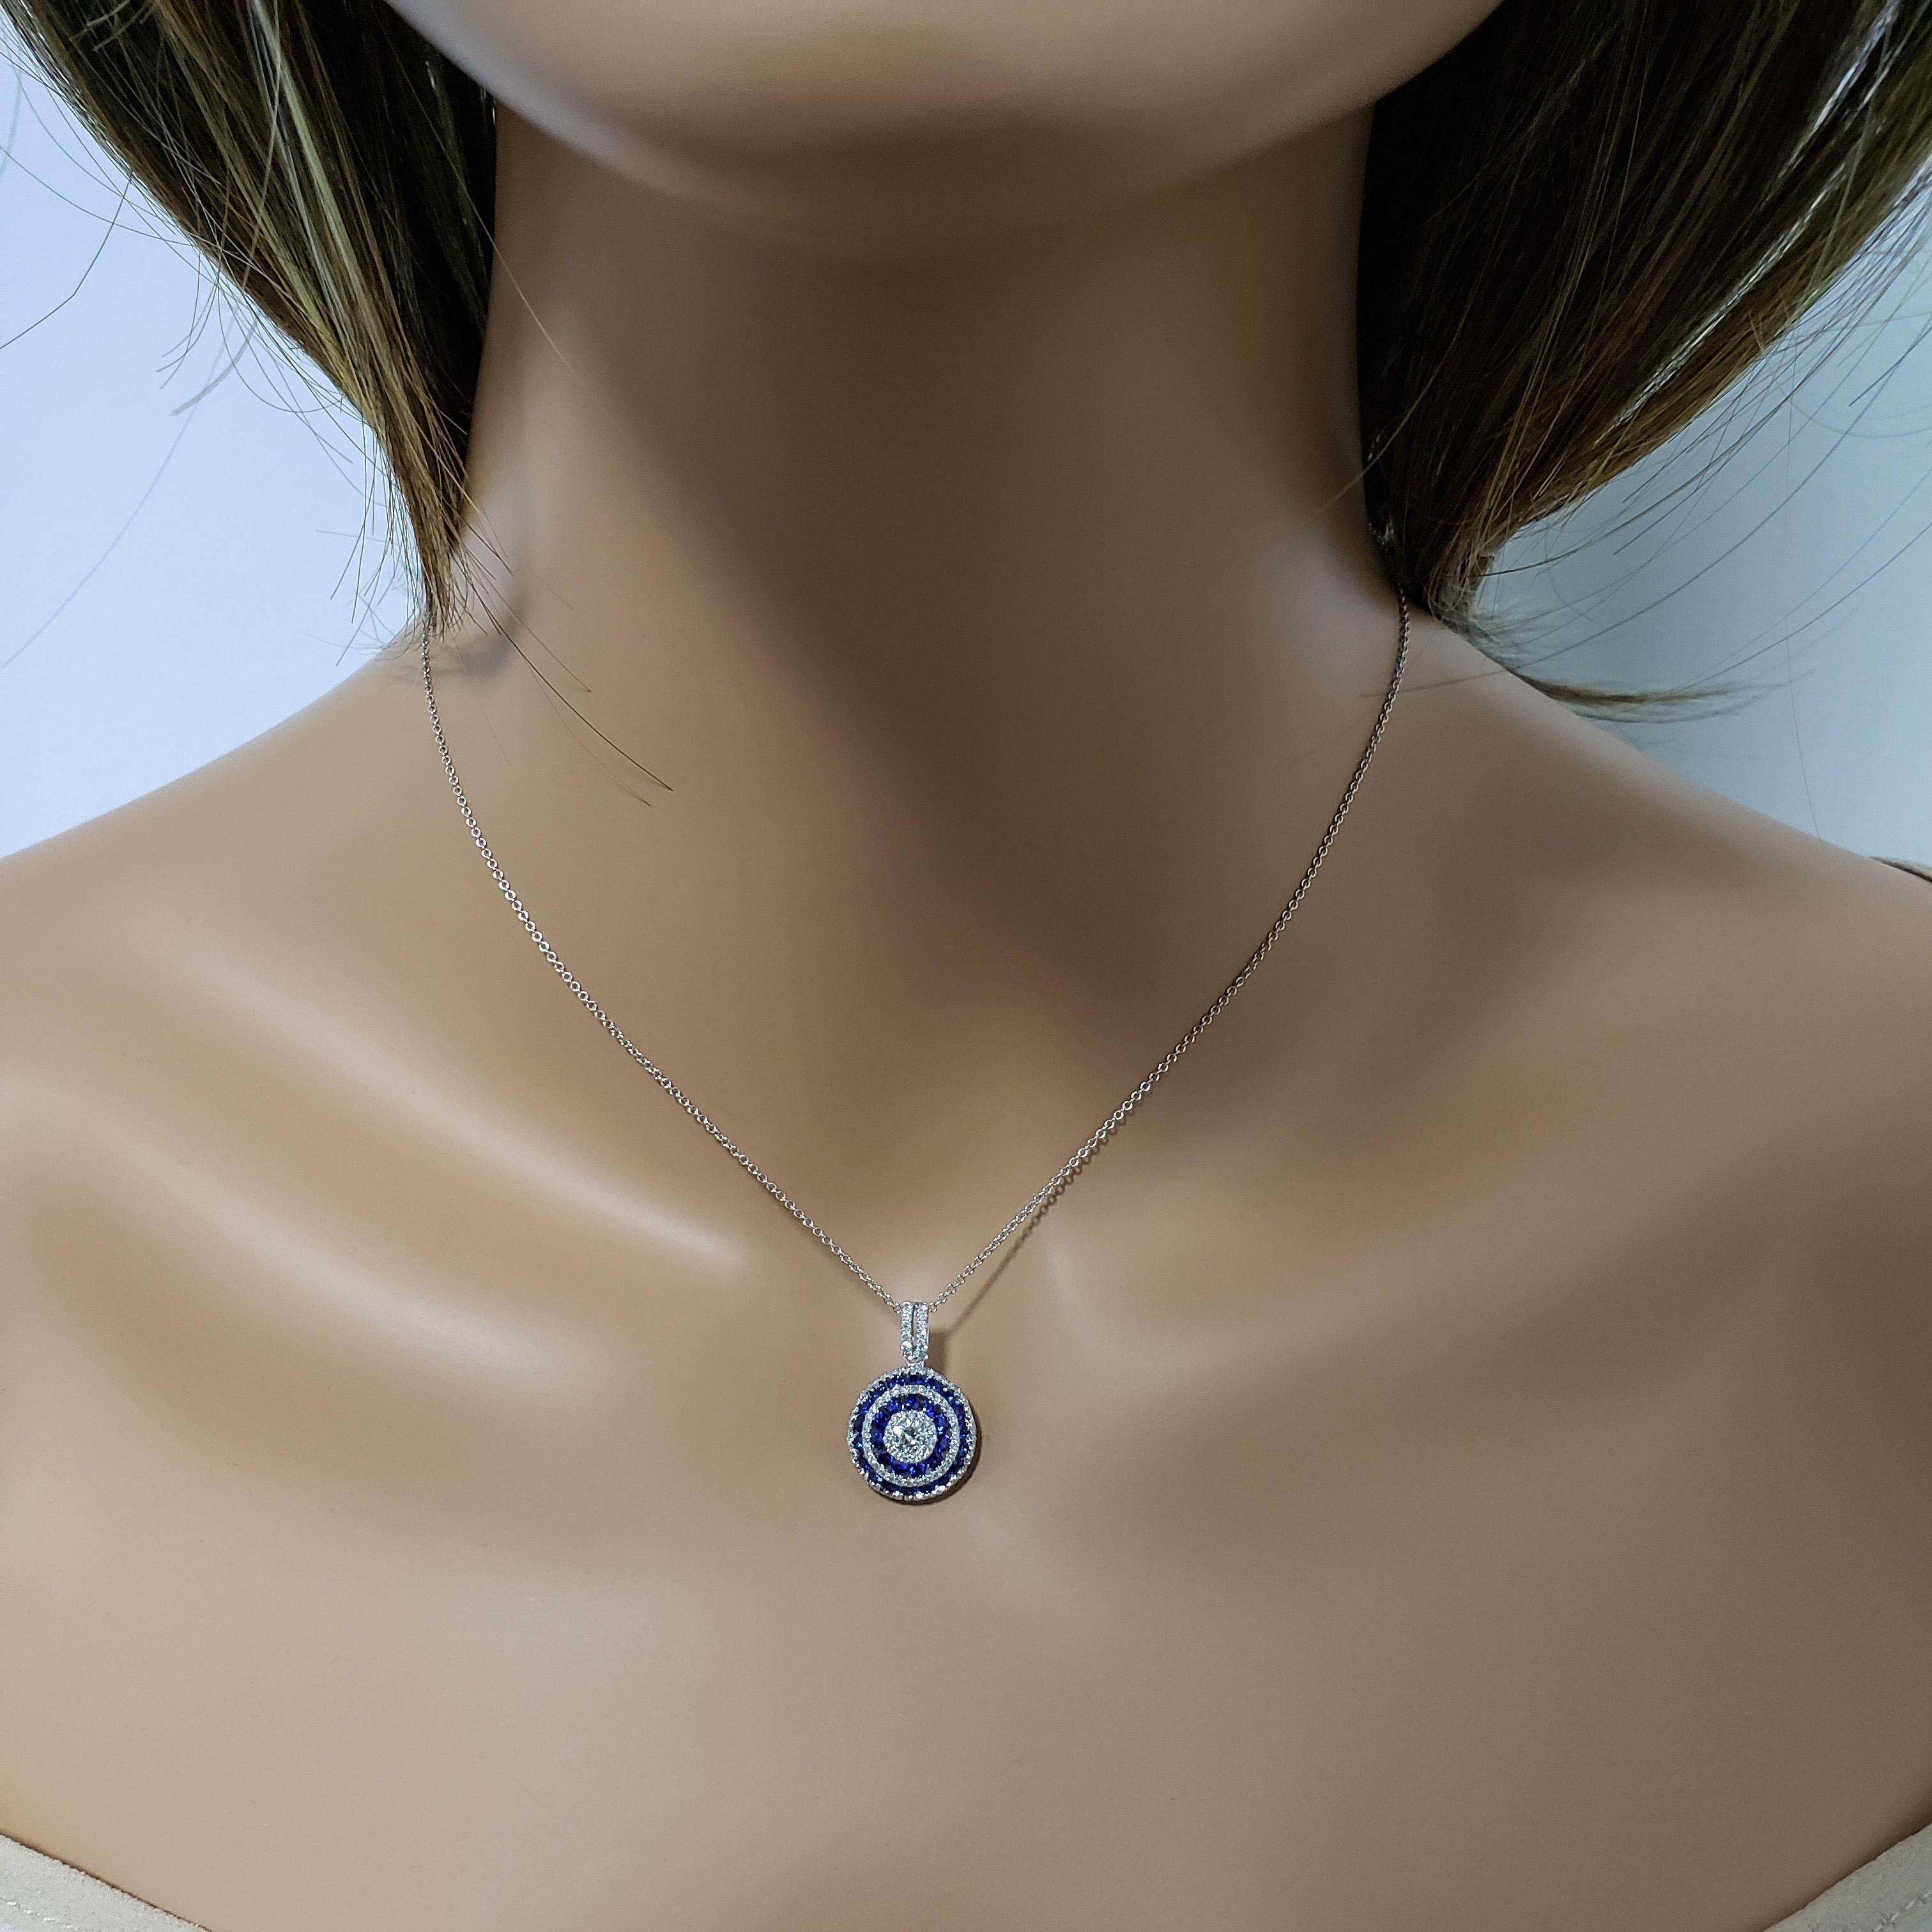 A unique and stylish pendant necklace showcasing a round brilliant diamond center, accented by rows of round diamonds and blue sapphires. Diamonds weigh 0.63 carats total; blue sapphires weigh 1.17 carats total. Made in 18k white gold.

Roman